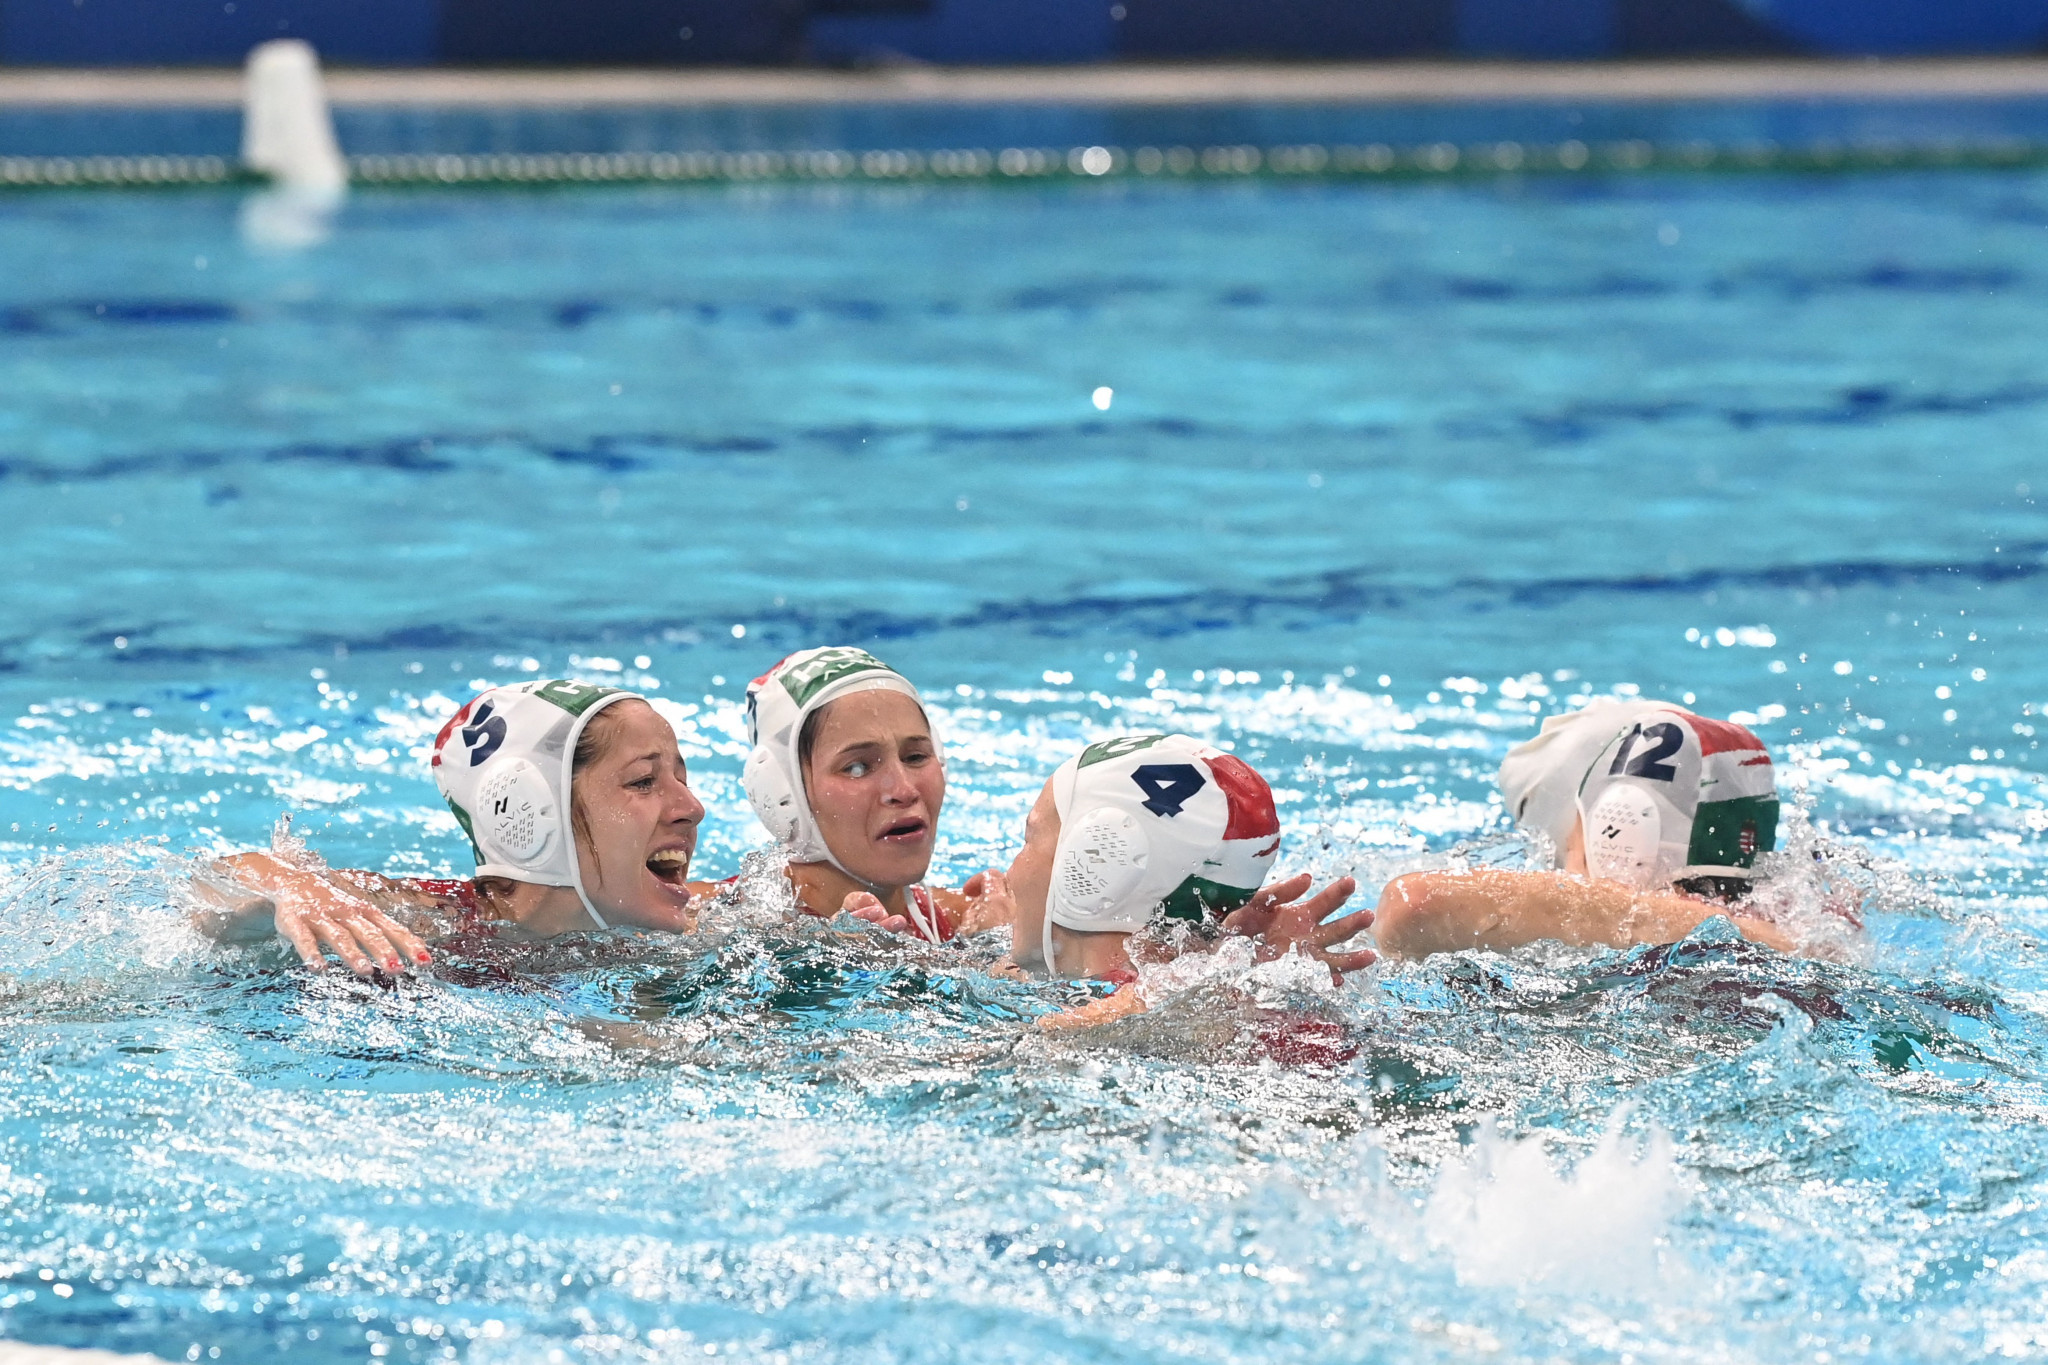 Hungary's women are set to play their water polo opener in Budapest on Monday (June 20) ©Getty Images